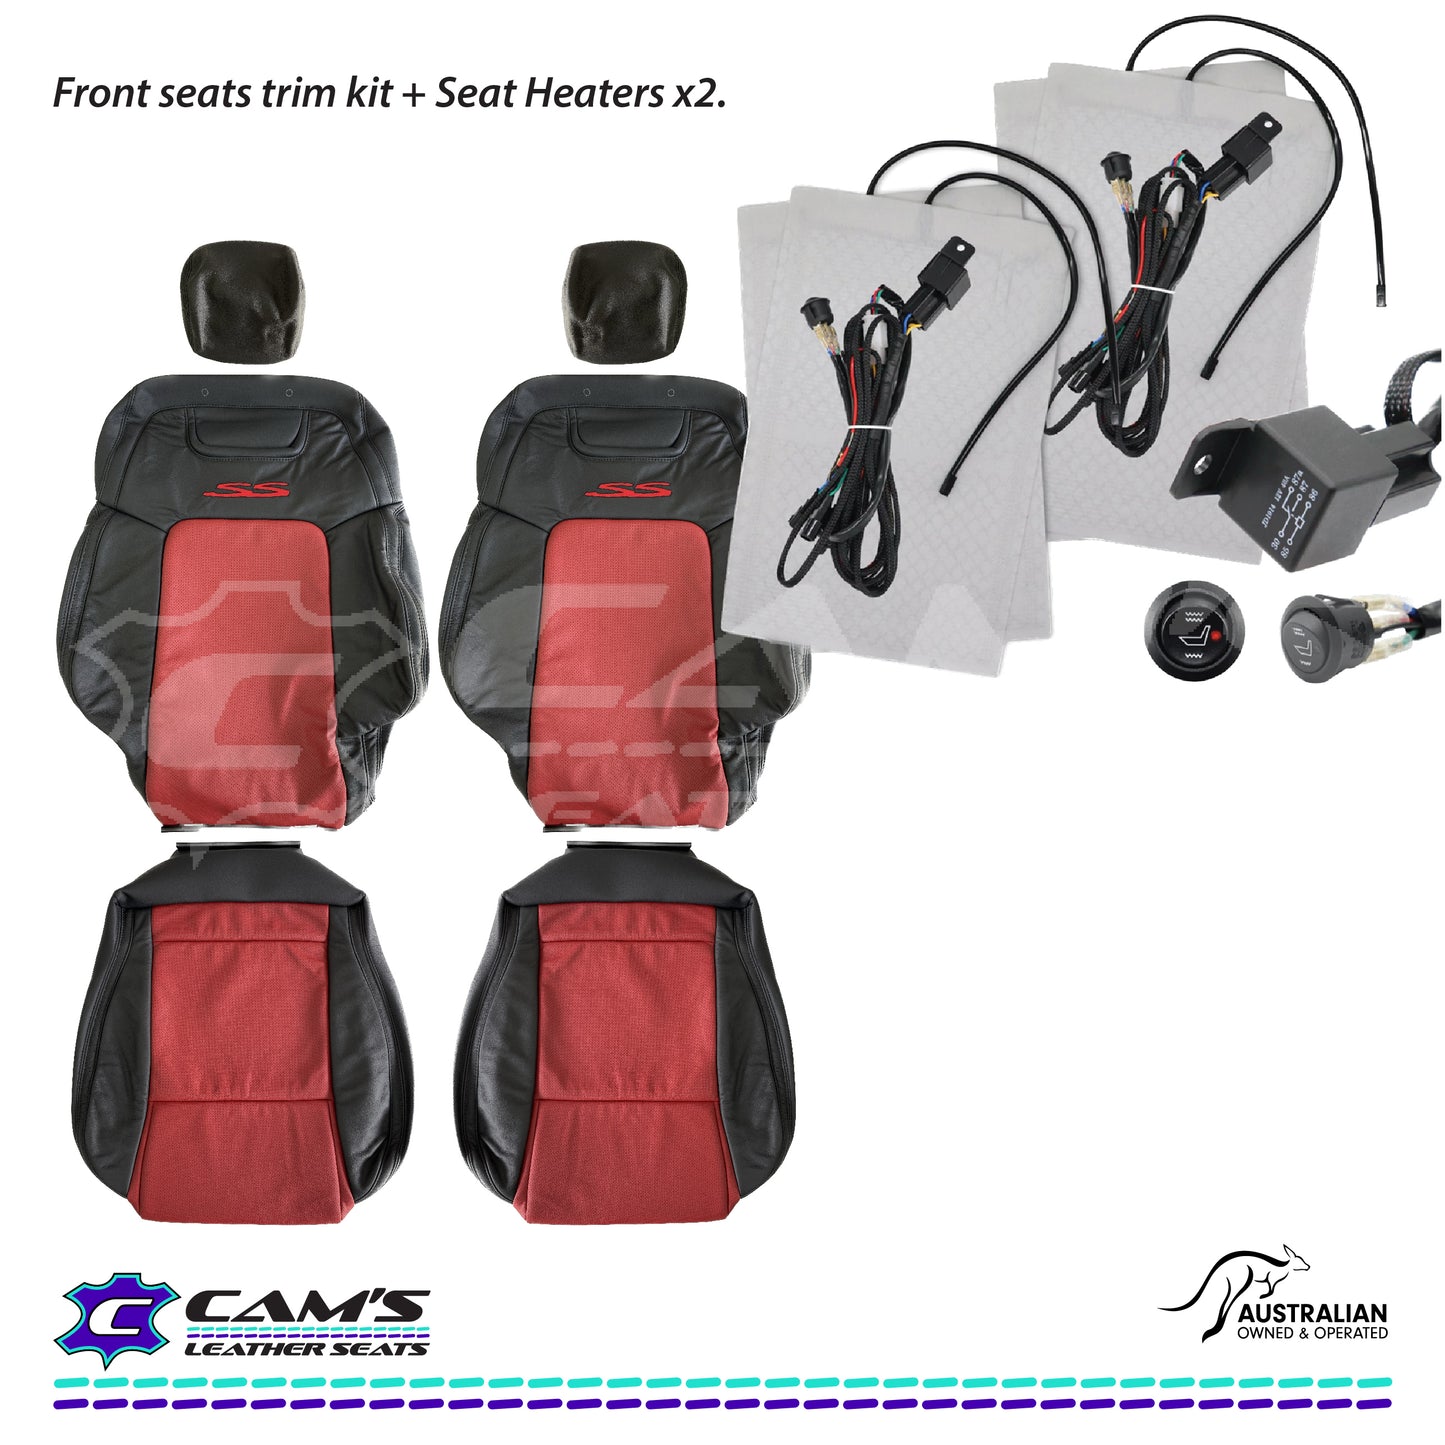 LEATHER SEATS TRIM KIT FOR VE SS 2 FRONT SEATS OR UTE ONYX & RED HOT INSERTS